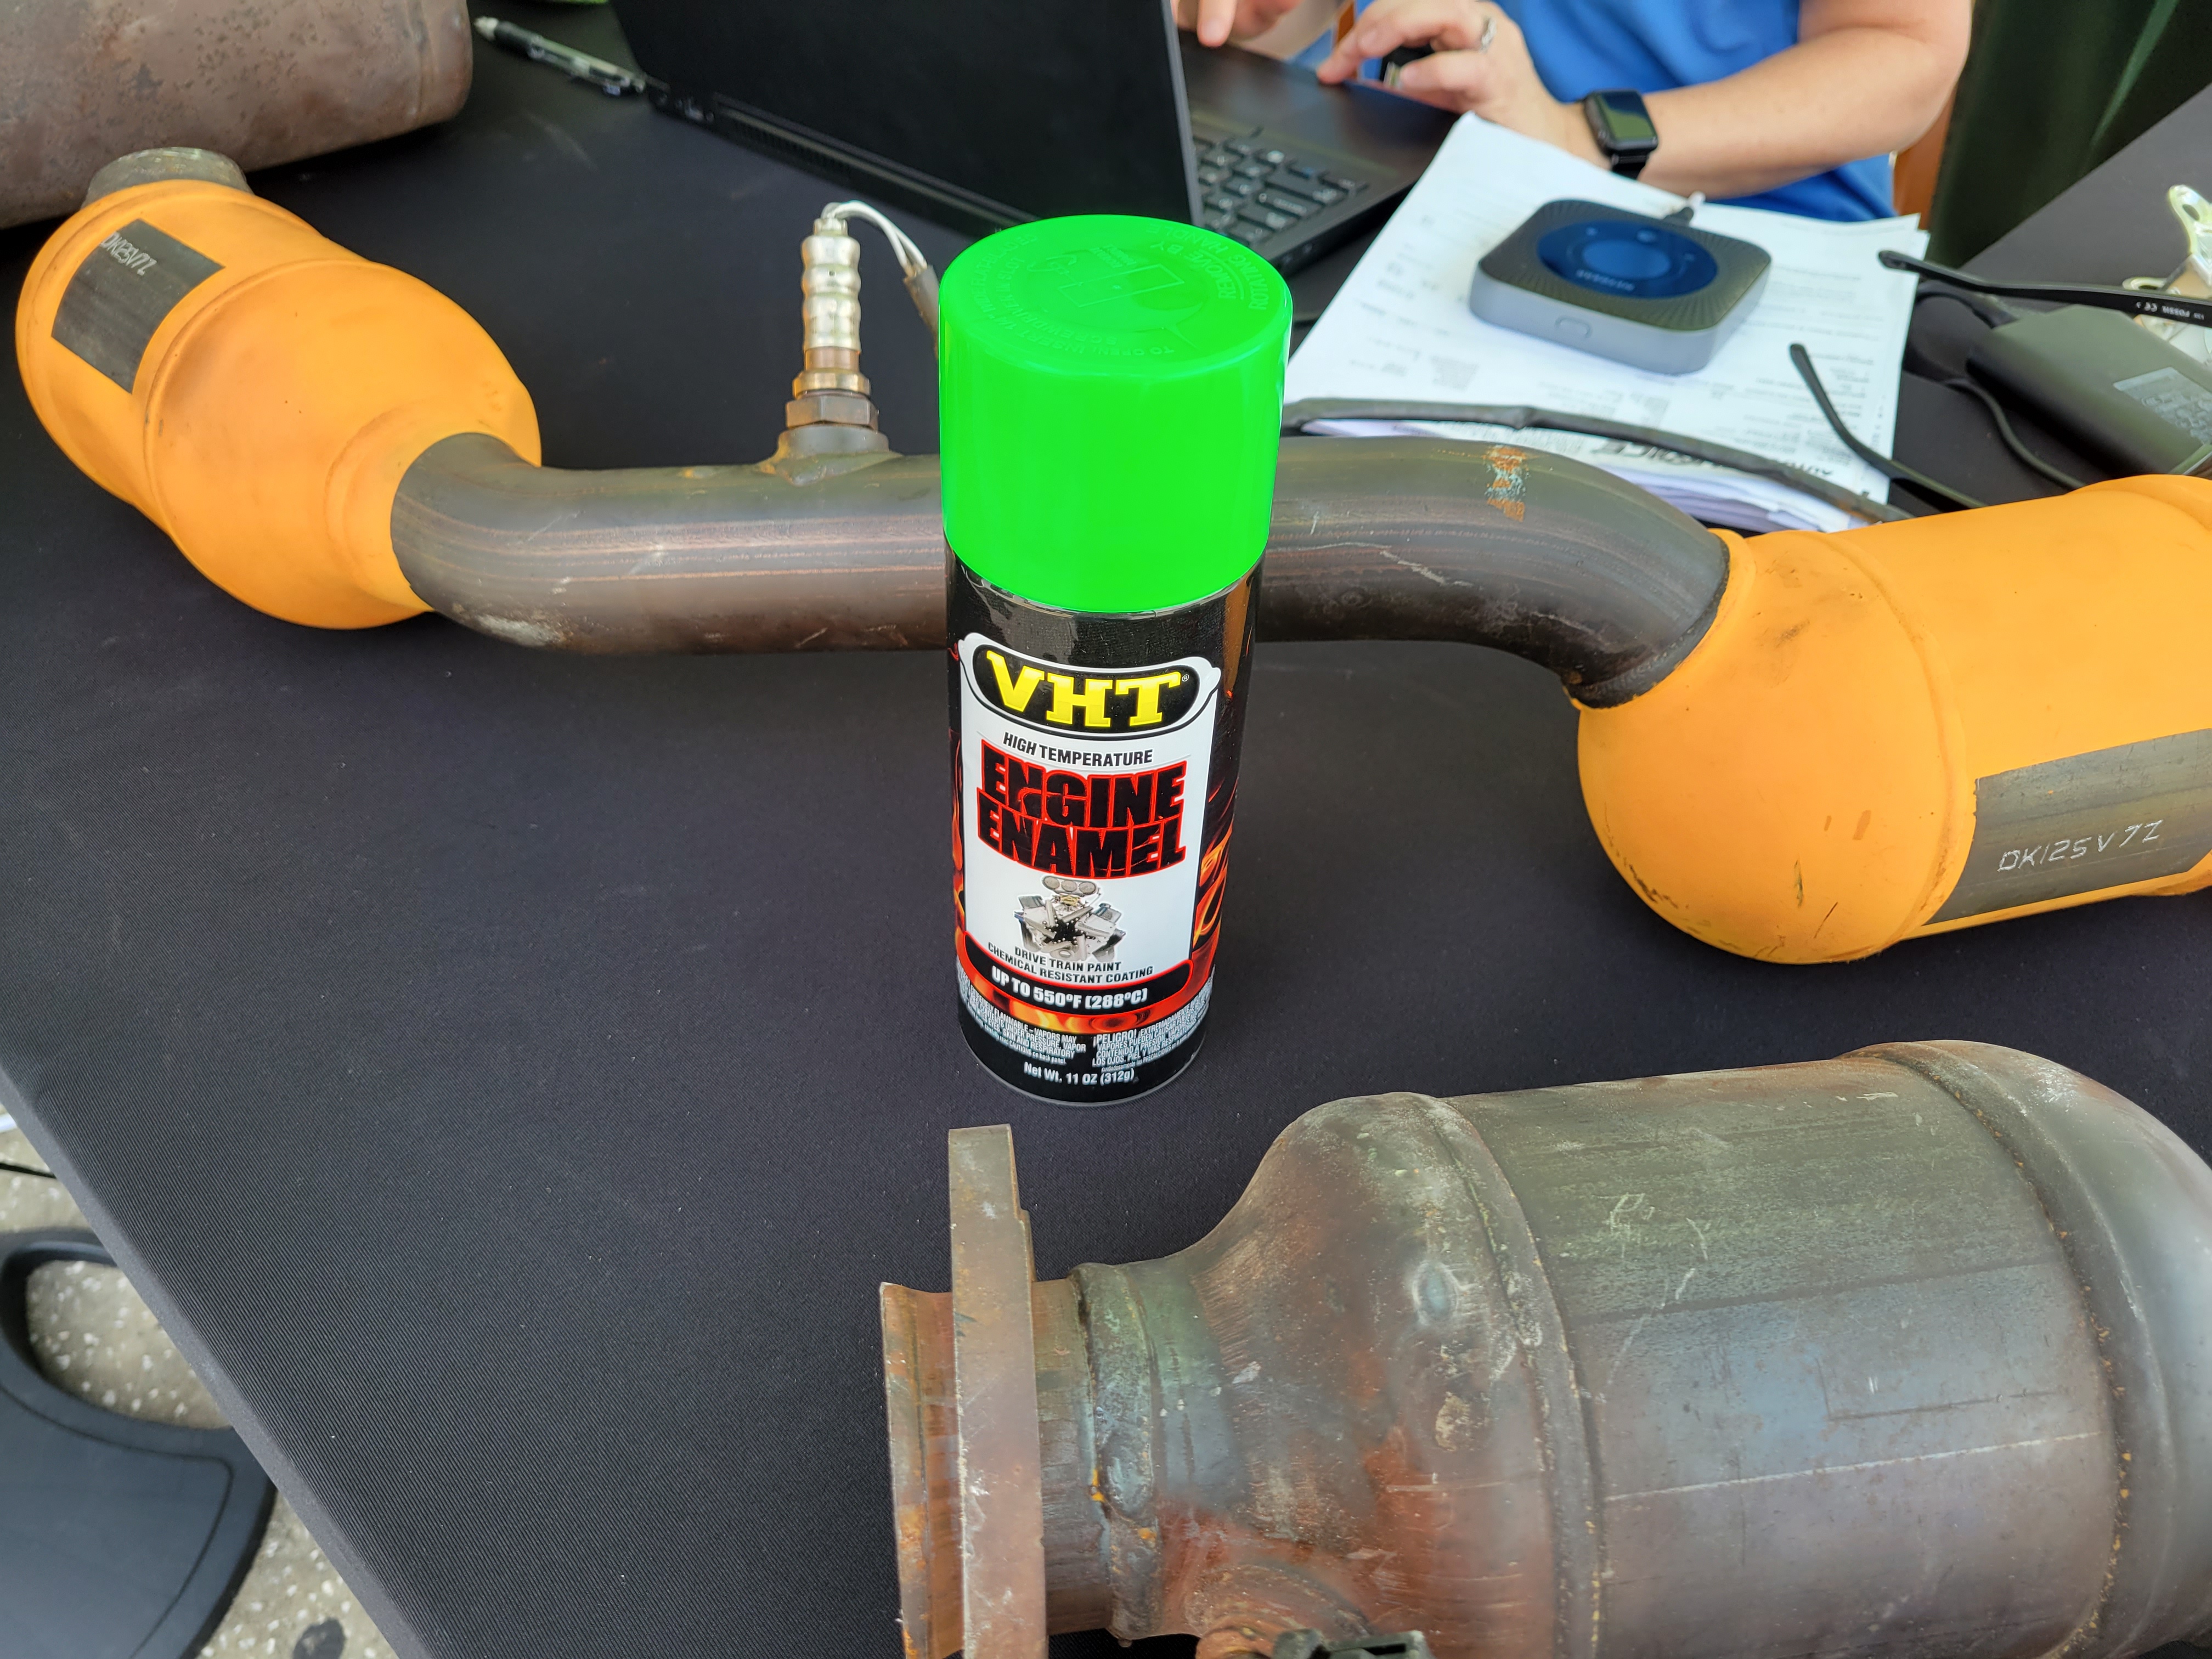 HCSO holds successful first time catalytic converter etching event